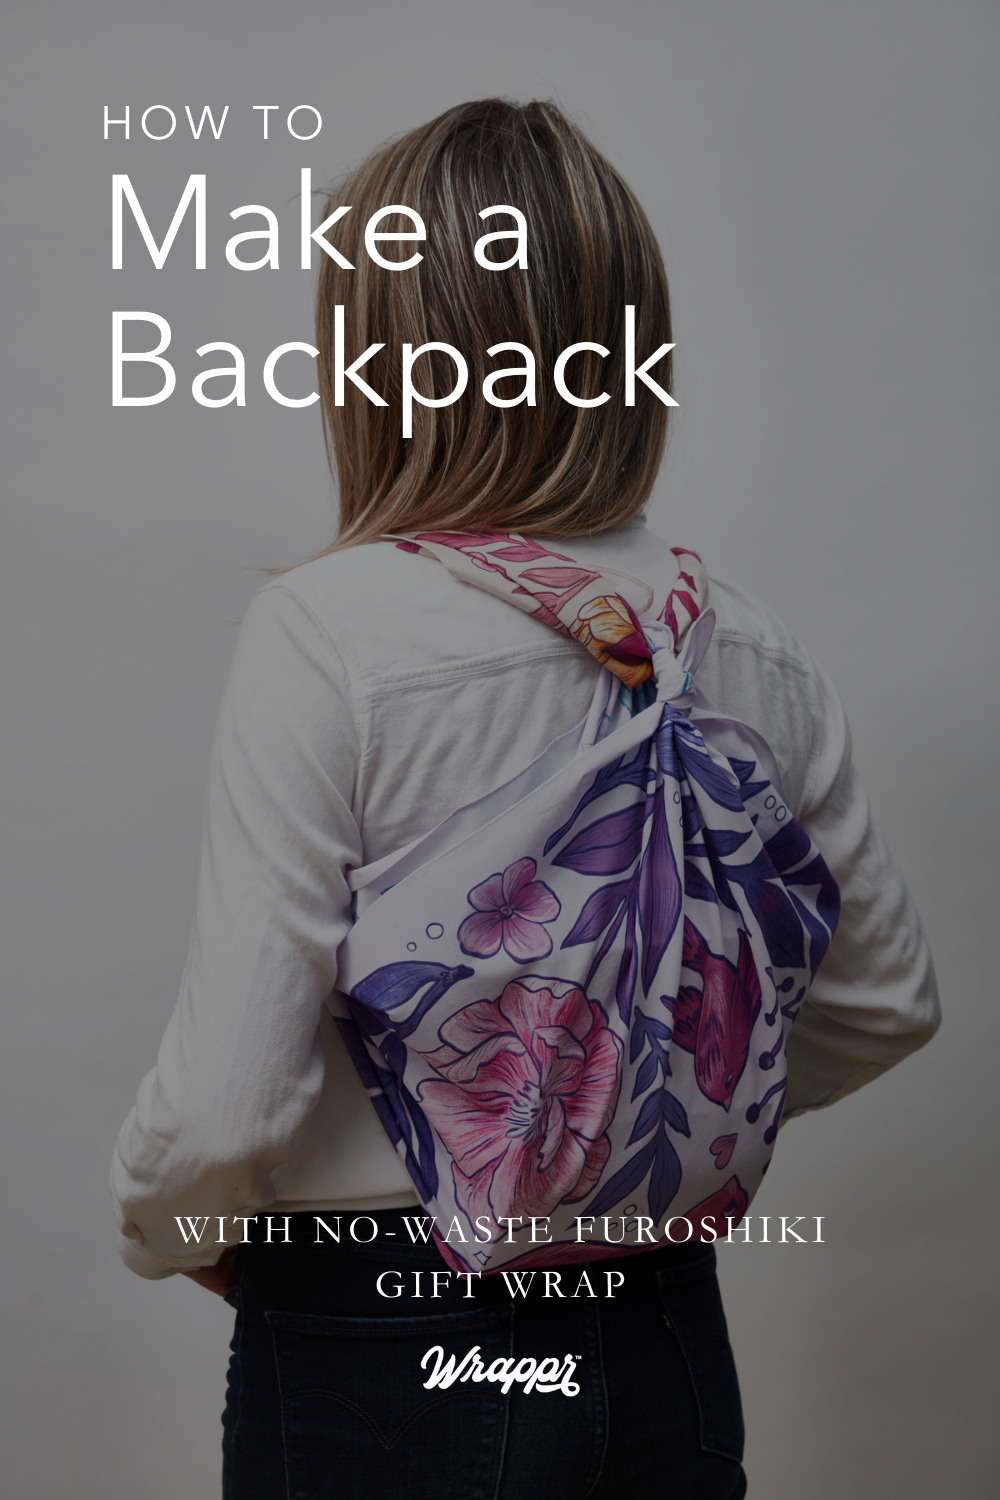 Wrappr How to Make a Backpack with Furoshiki